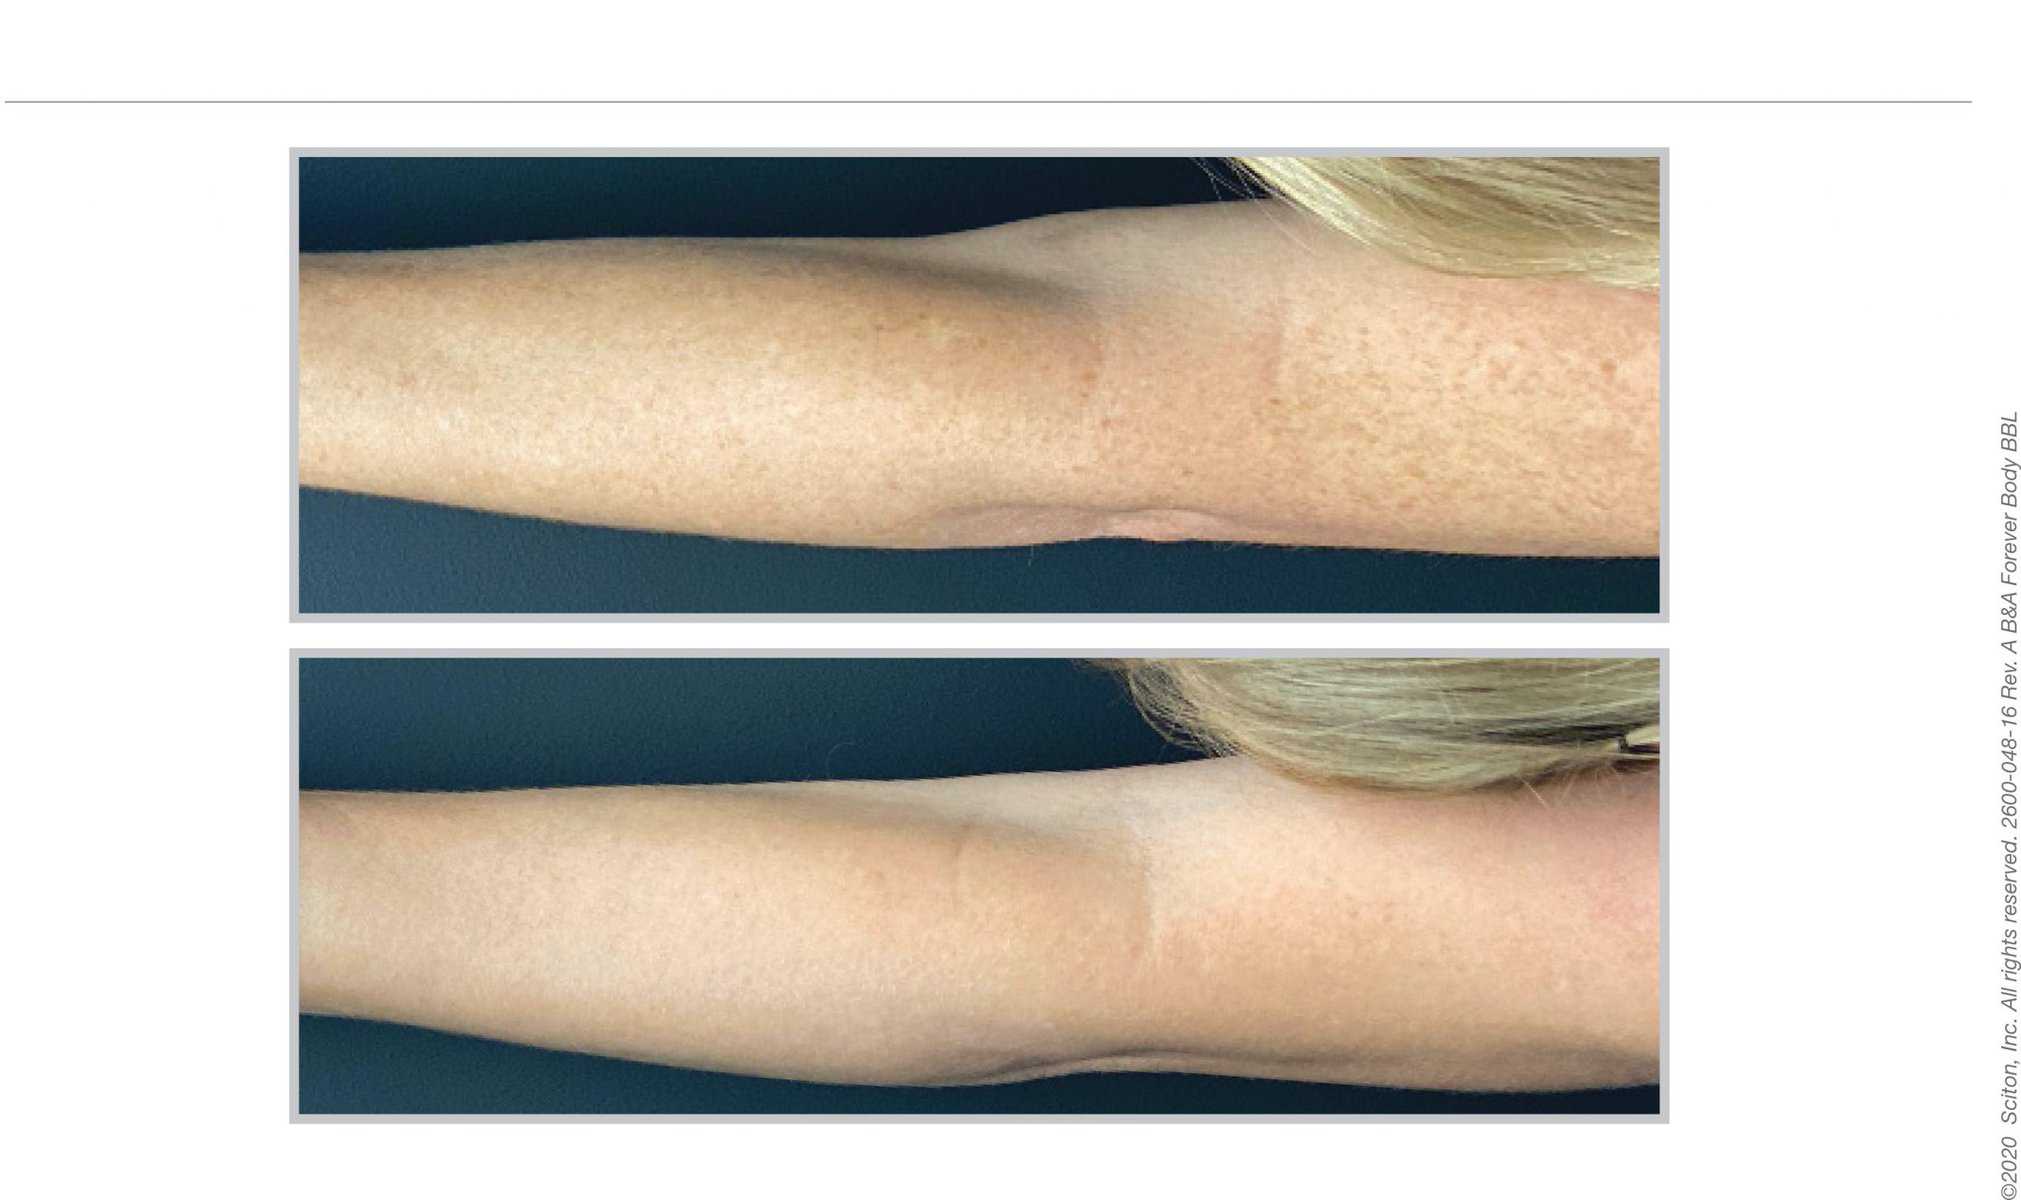 Female patient before and after BBL treatment 06, Infinity Skin Clinic Mosman & Surry Hills